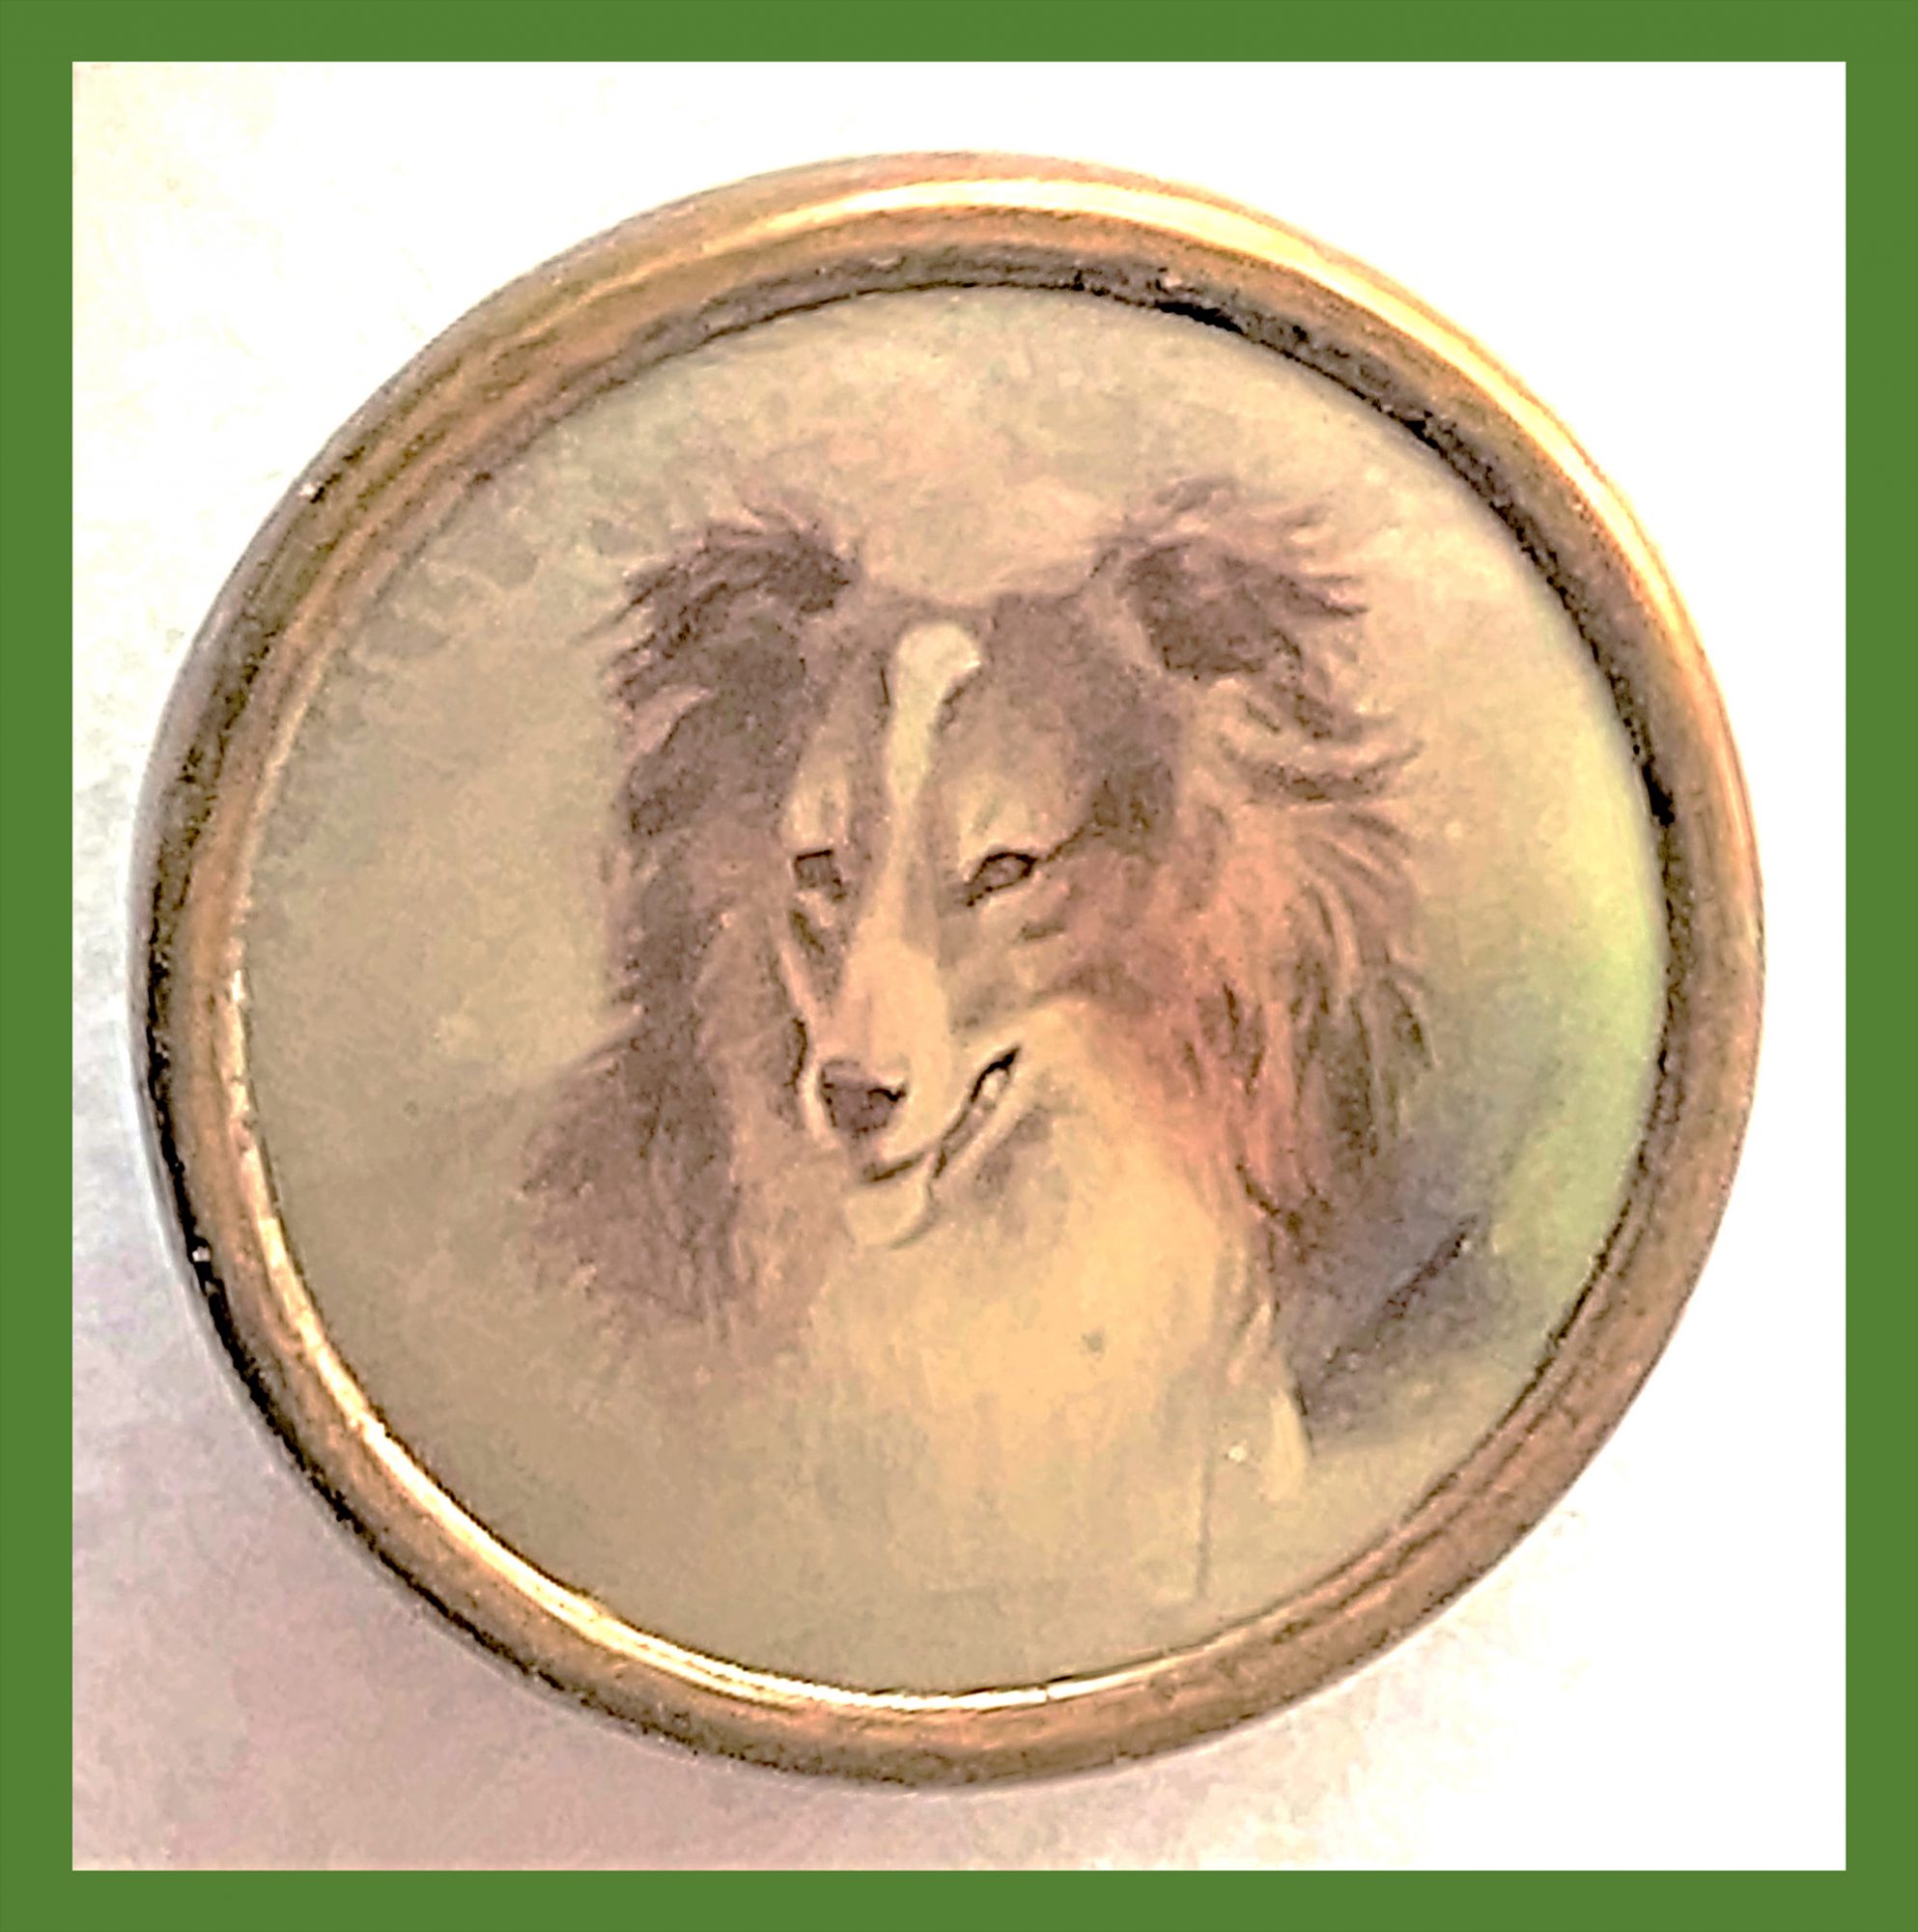 1 of a set of litho buttons of different dogs button